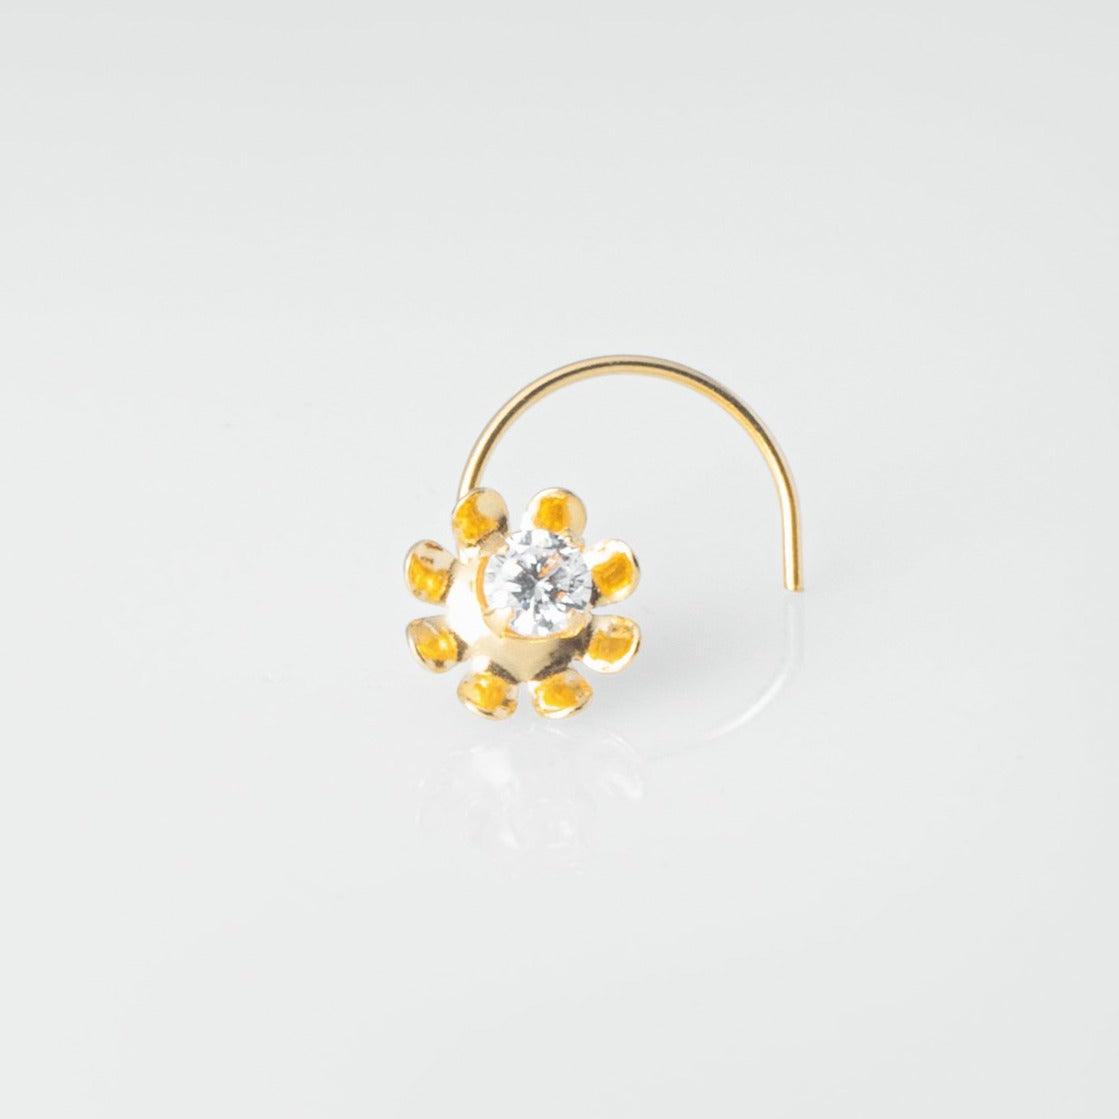 18ct Yellow Gold Wire Coil Back Nose Stud set with Cubic Zirconia in a Flower Design (4.5mm - 6mm) NIP-4-080